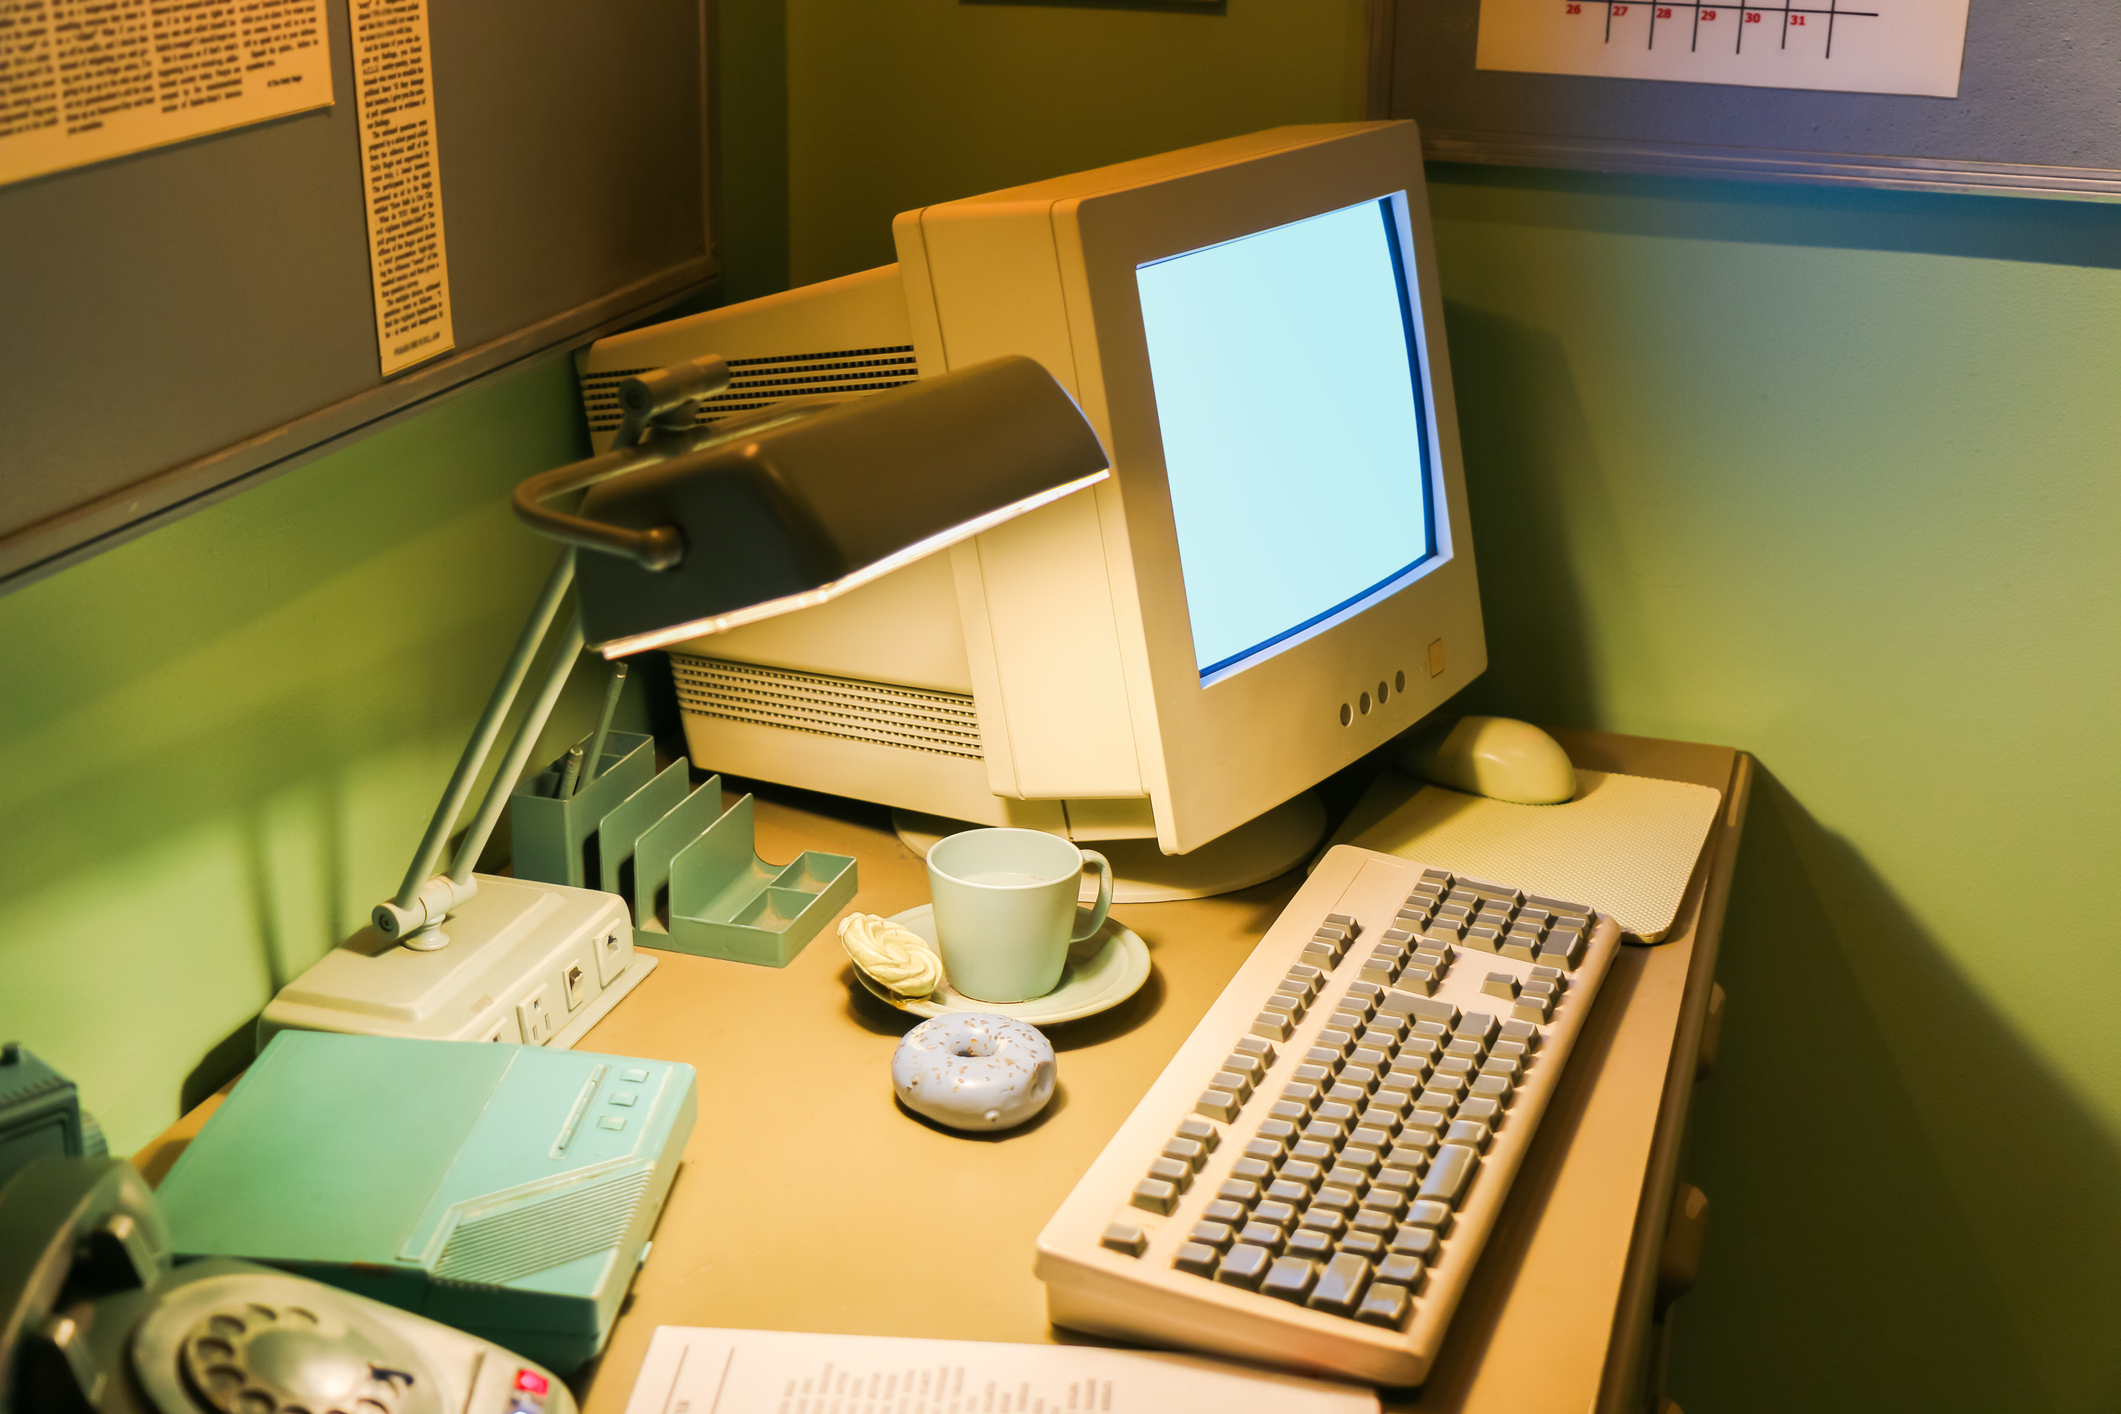 Old 90s computer with keyboard and lit up lamp.